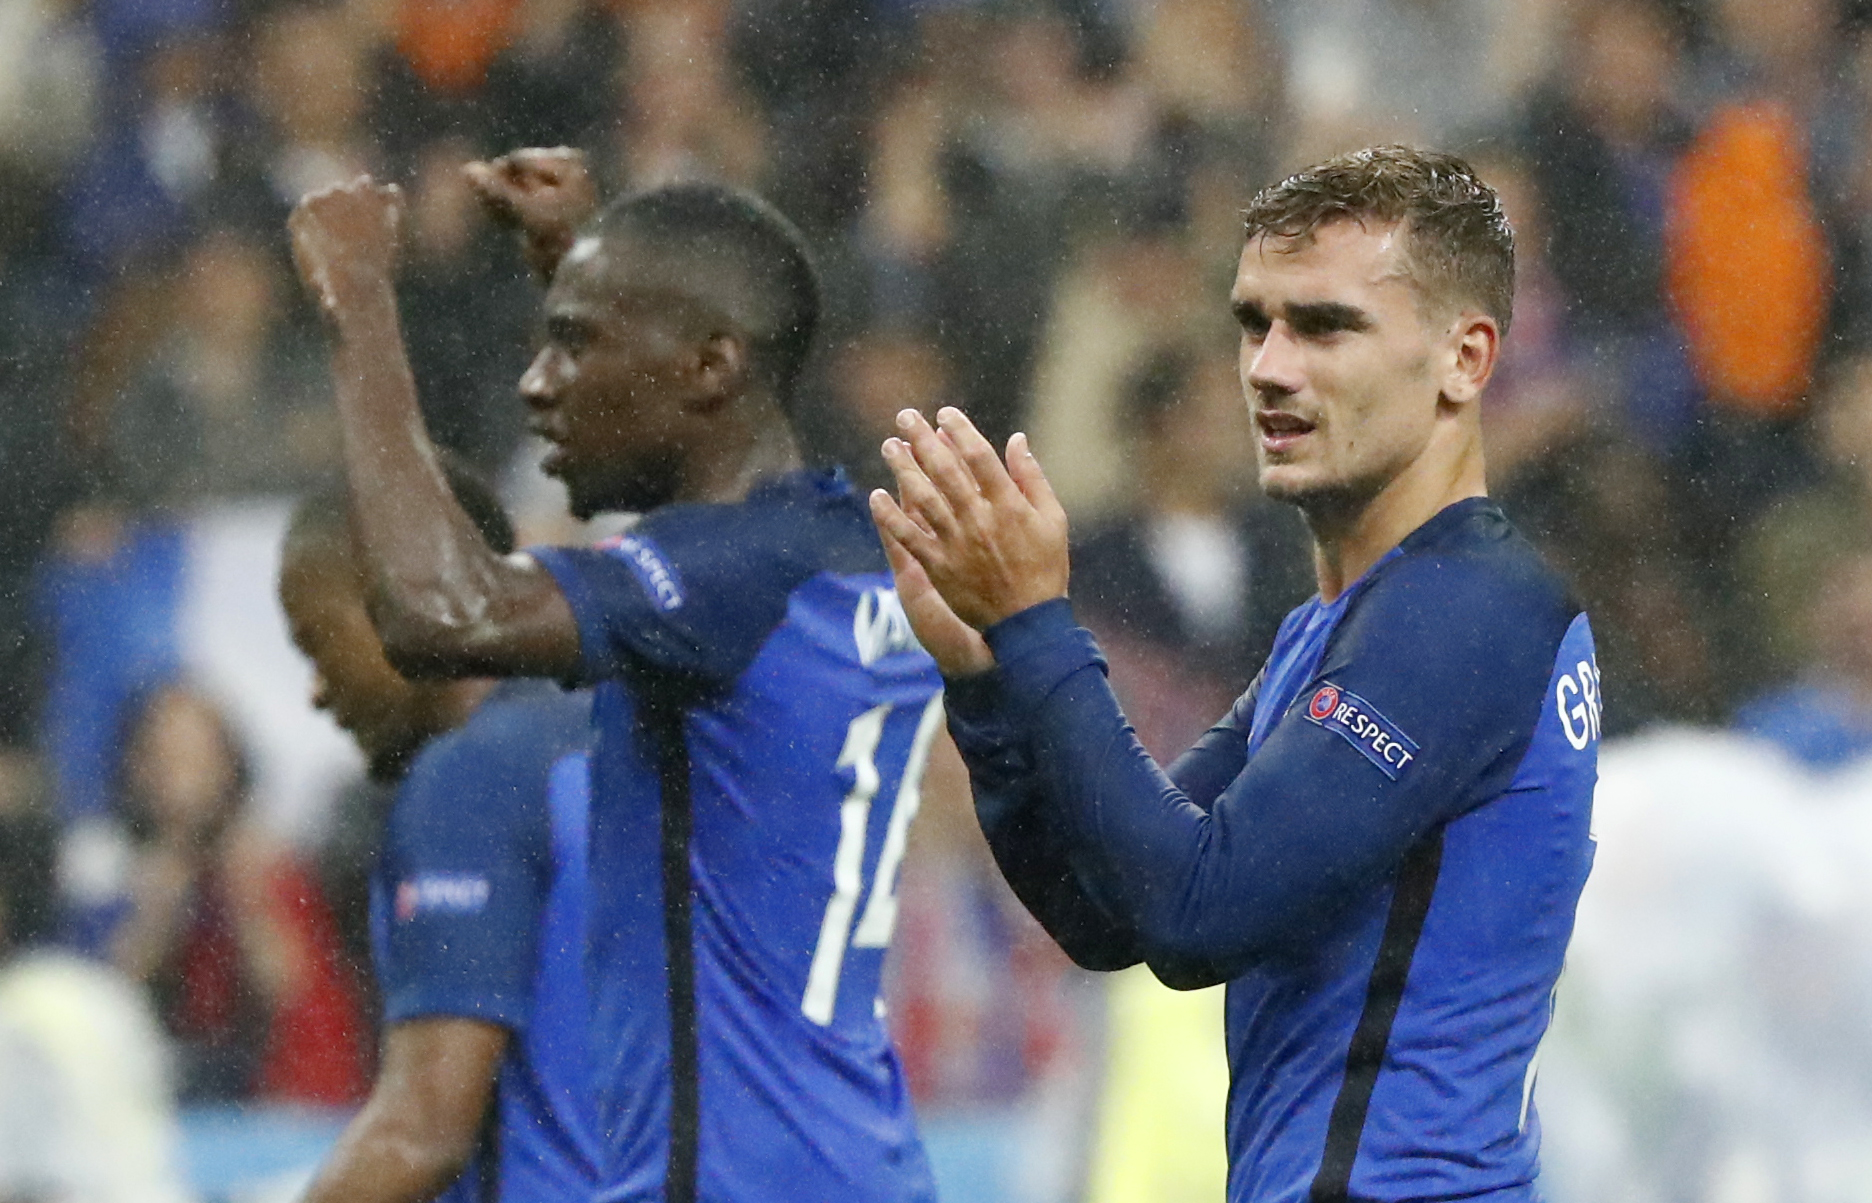 Euro 2016: France end Iceland's dream run with 5-2 rout